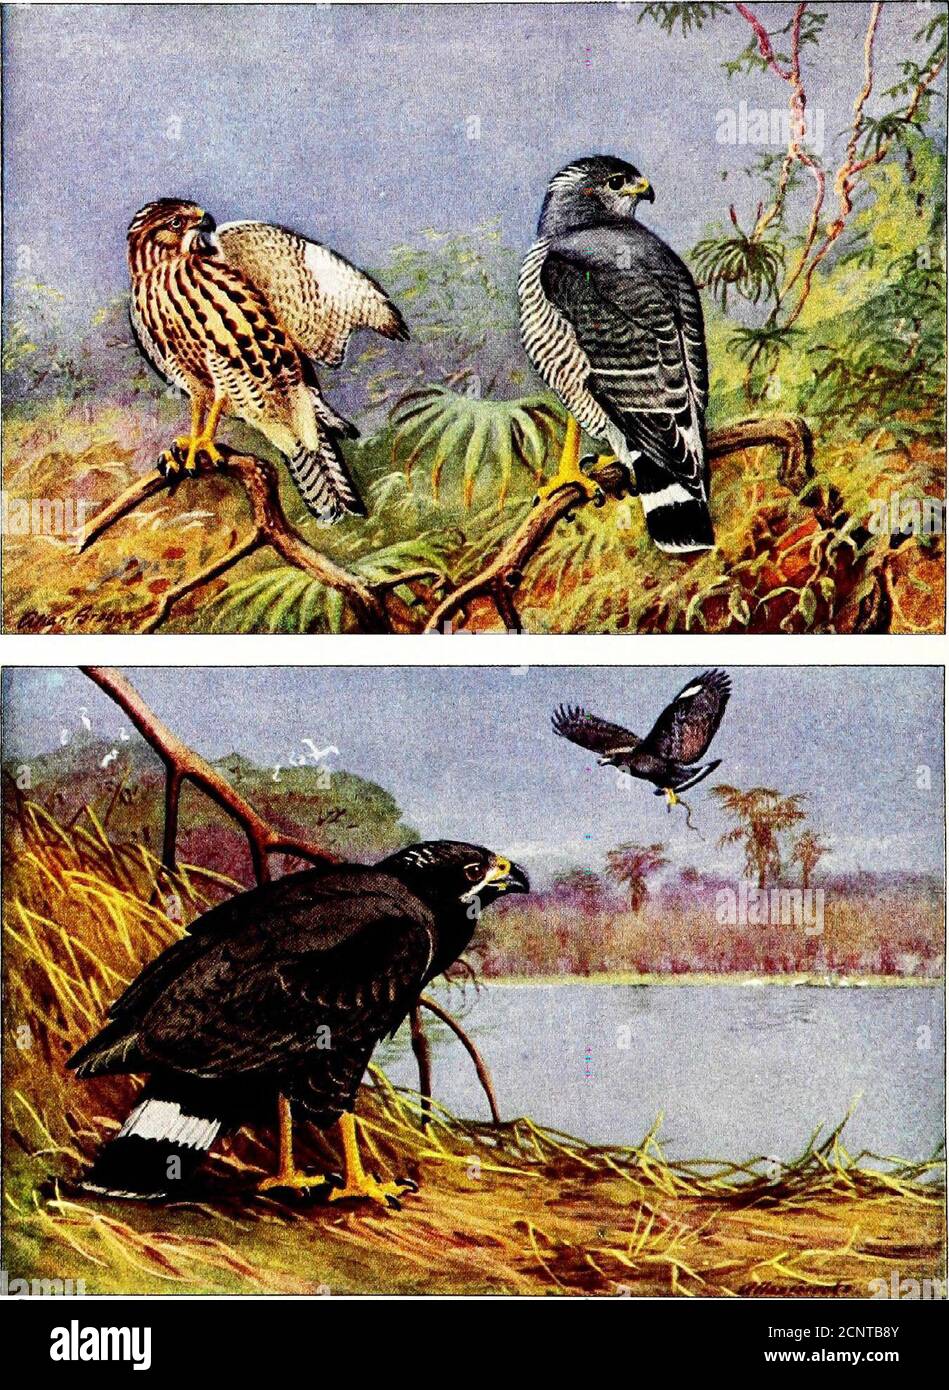 . Falconry, the sport of kings . ) NatioTial (/eoi^Taphic Society ^Mfii«eiW&lt;j ROUGH-LEGGED HAWK Upper; ordinary light phase; adult perched, immature flying u V^ ^c.Ti.M YieV??Vax- as posStVAc Vc&lt;-A^J^r^J■(v^a^^^fl,. (z.srxA WeVn , tV% tV&gt; CO V)raa«- ^ okOj^^e -b&lt;y &lt; ntss IX THE NATIONAL GEOGRAPHIC MAGAZINE. © Nation d r,.,,^i iphii bu. ili MEXICAN GOSHAWKUpper; adult (right), immature (left) Thcbt. li^uicb aiL ippuxiinatLK cin. s^, mth natural sizeMEXICAN BLACK HAWKLower ; adulty perched and flying X EAGLES, HAWKS, AND VULTURES 83 MEXICAN GOSHAWK (Asturina plagiata plagiata Stock Photo